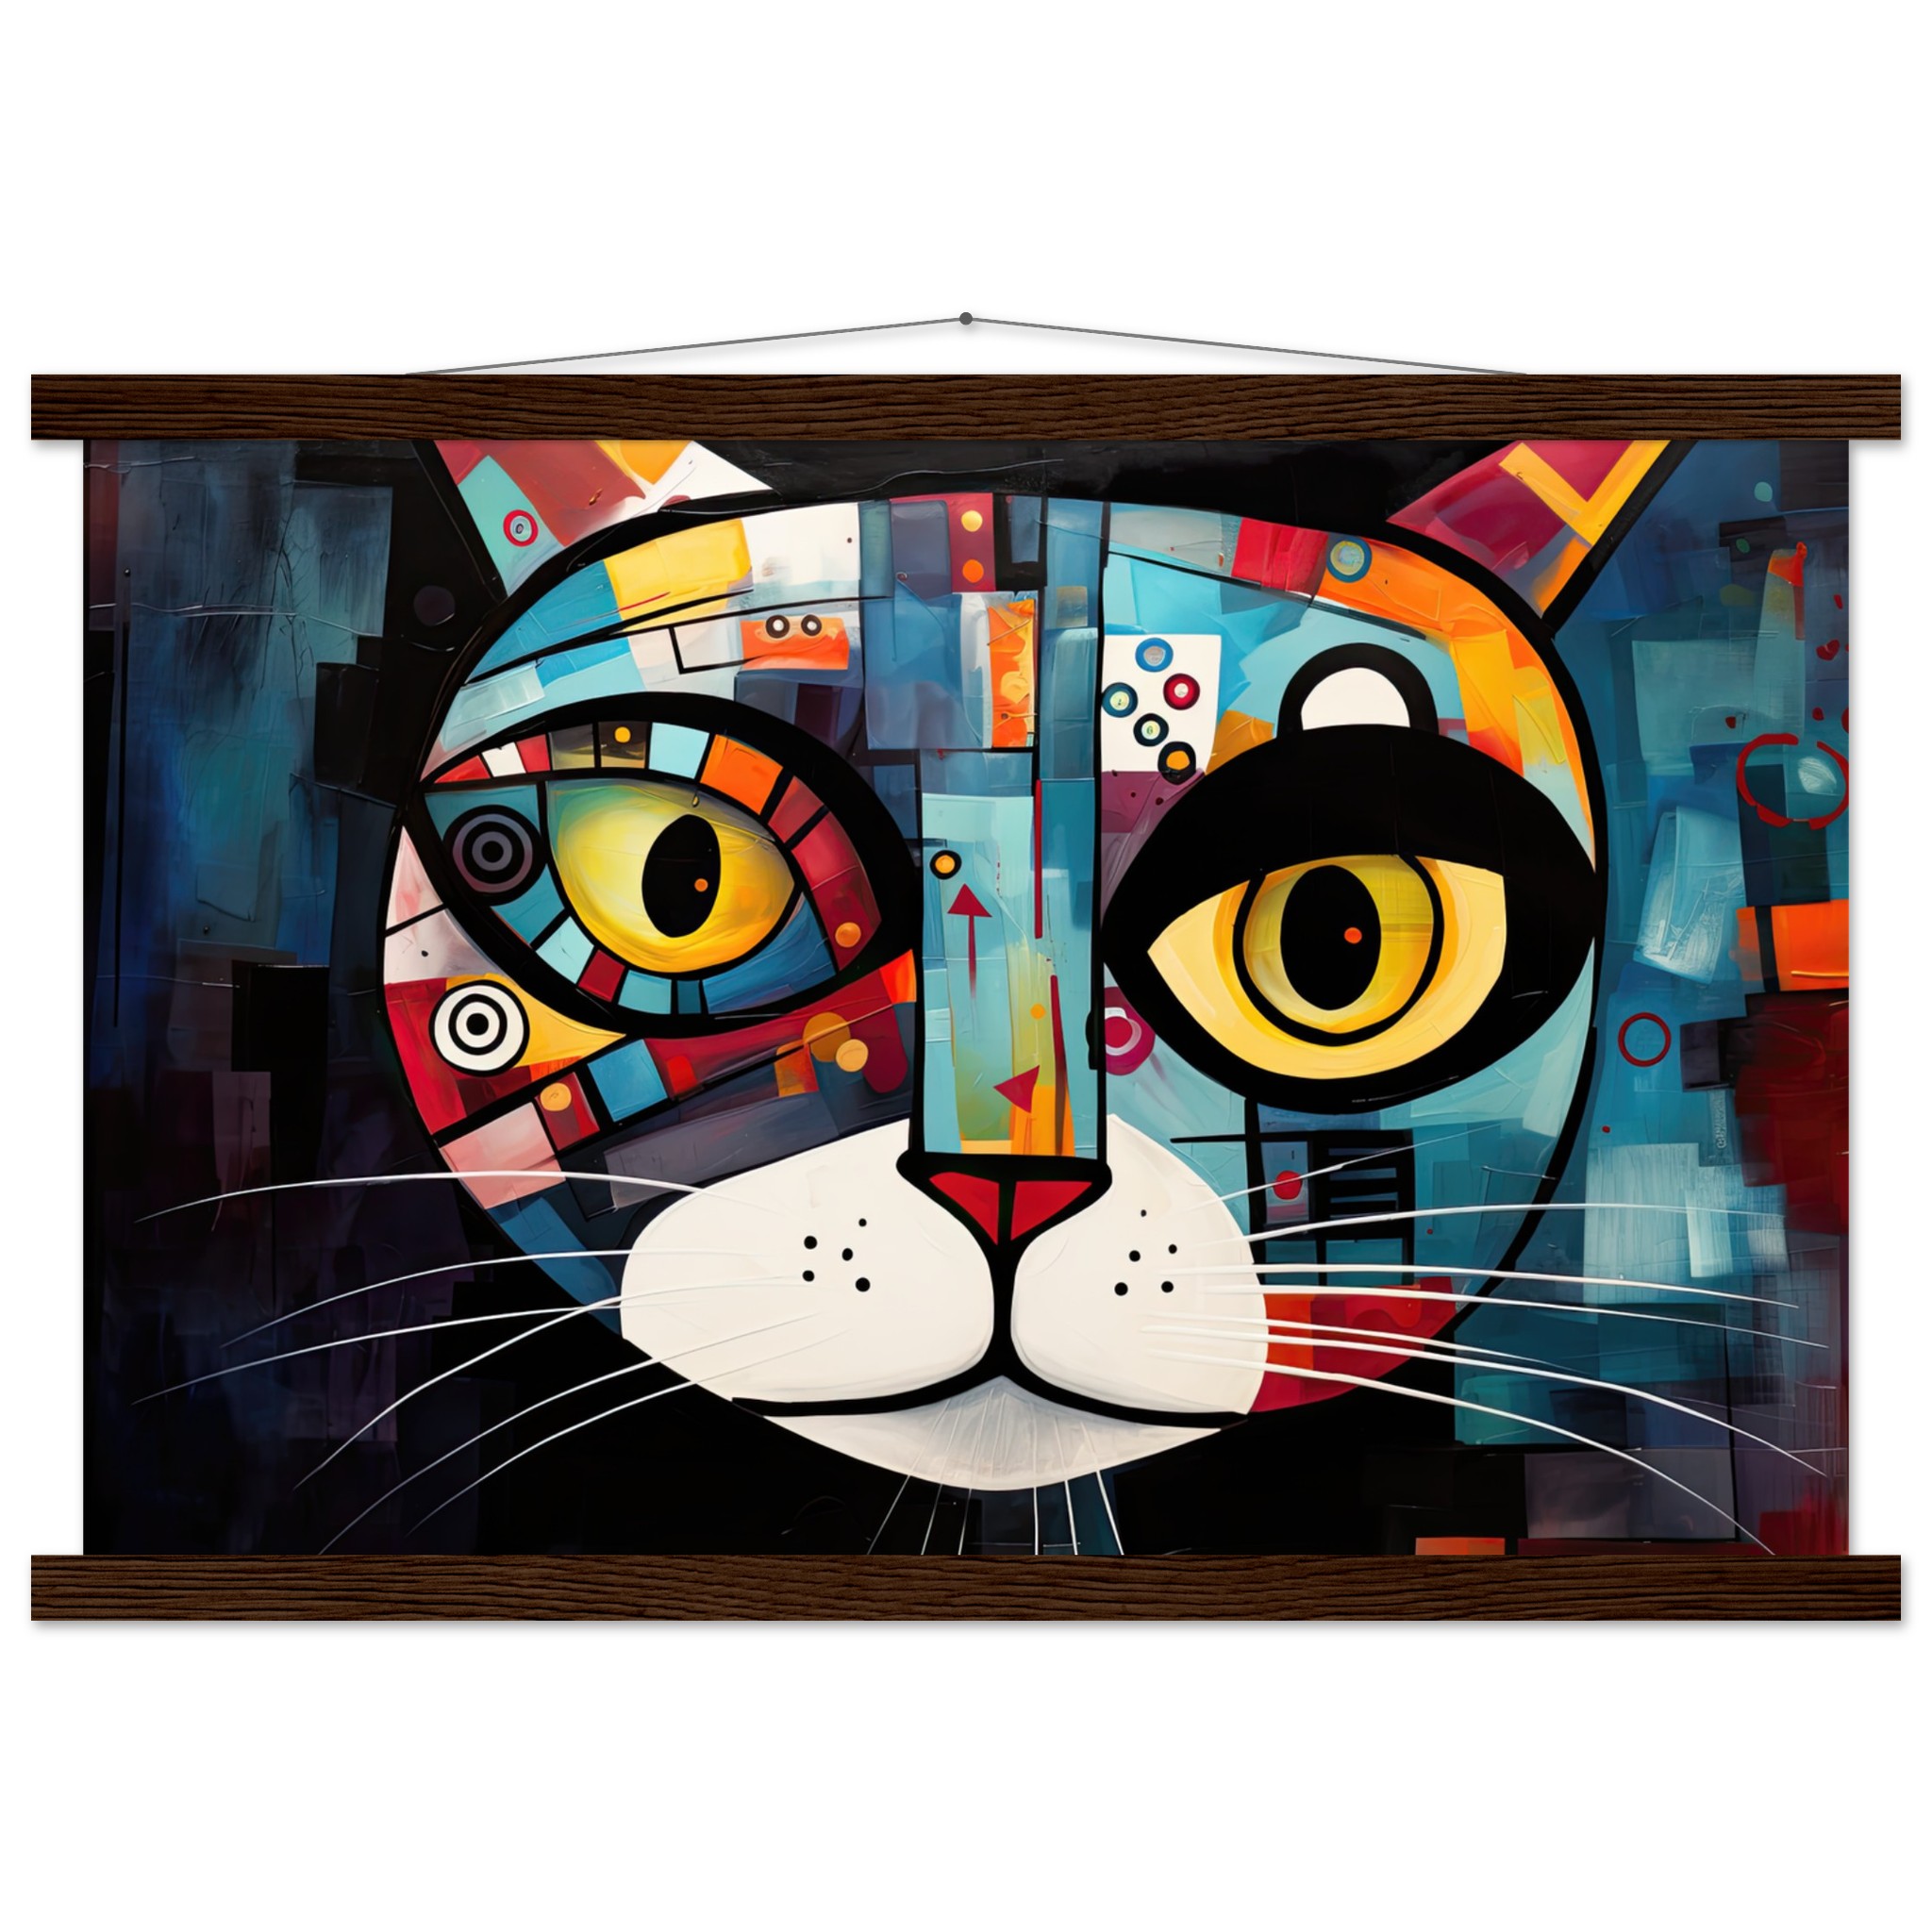 Abstract Painted Cat Face Hanging Print – 40×60 cm / 16×24″, Dark wood wall hanger